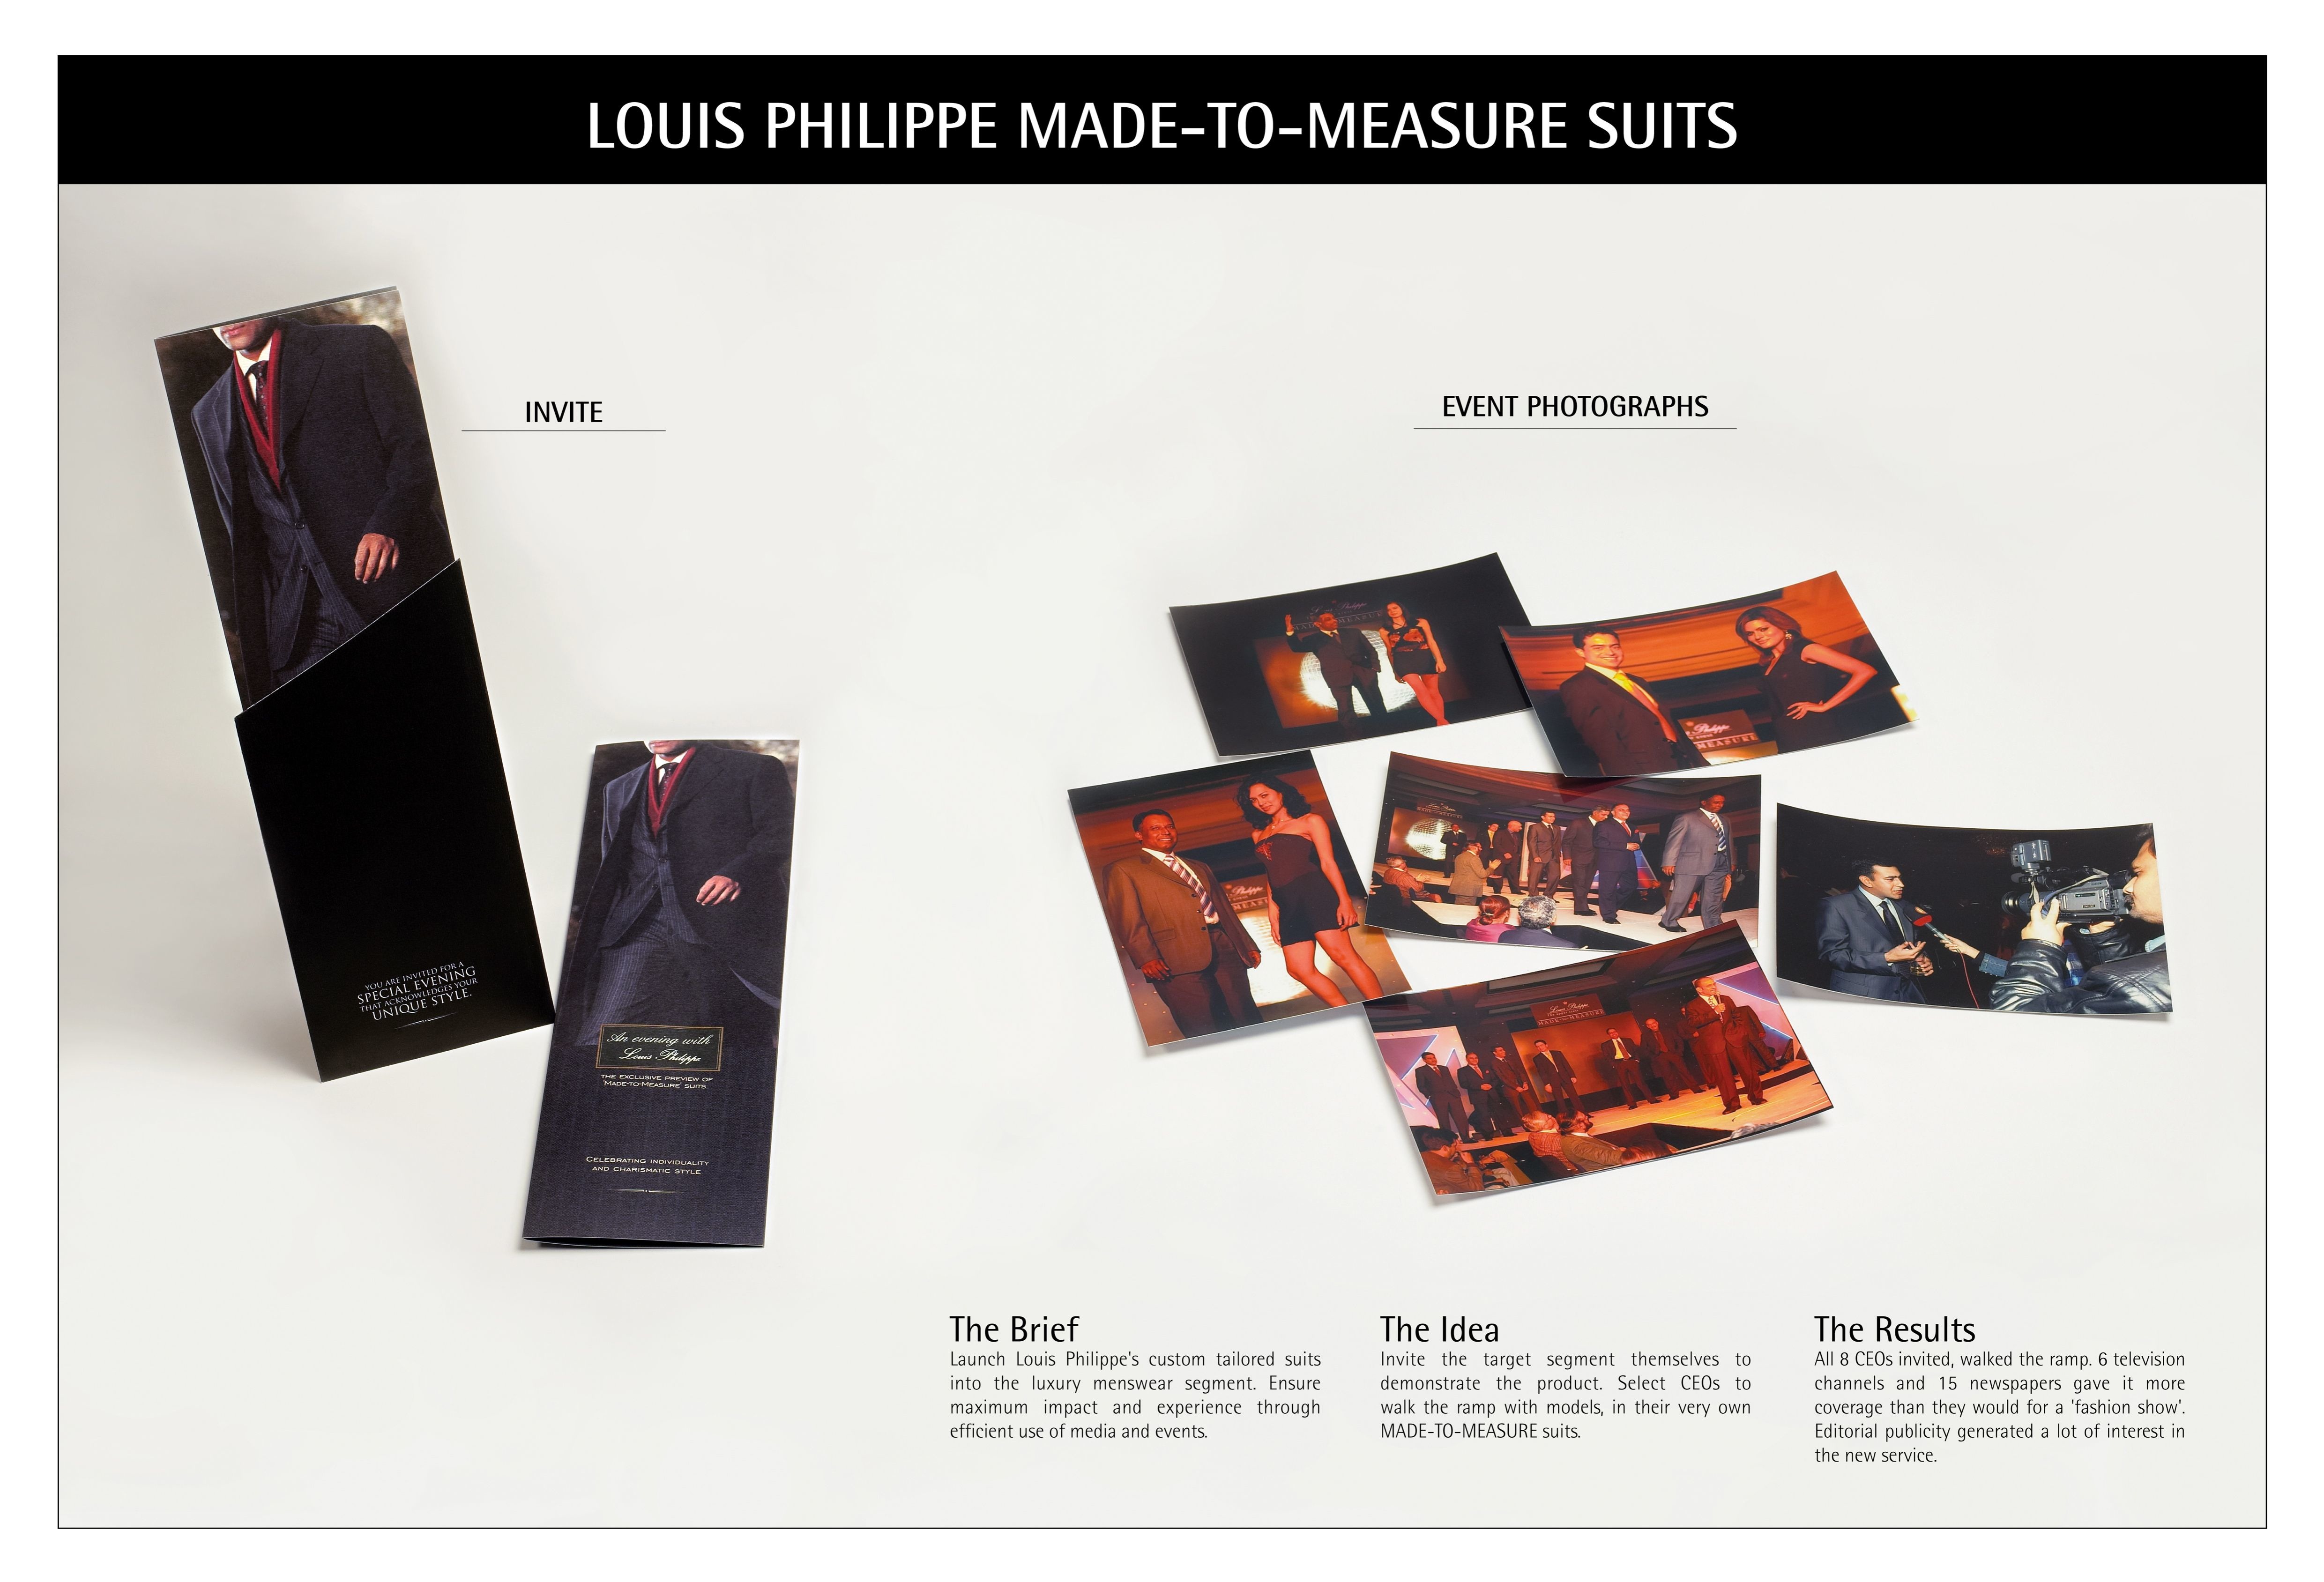 LOUIS PHILIPPE MADE-TO-MEASURE SUITS